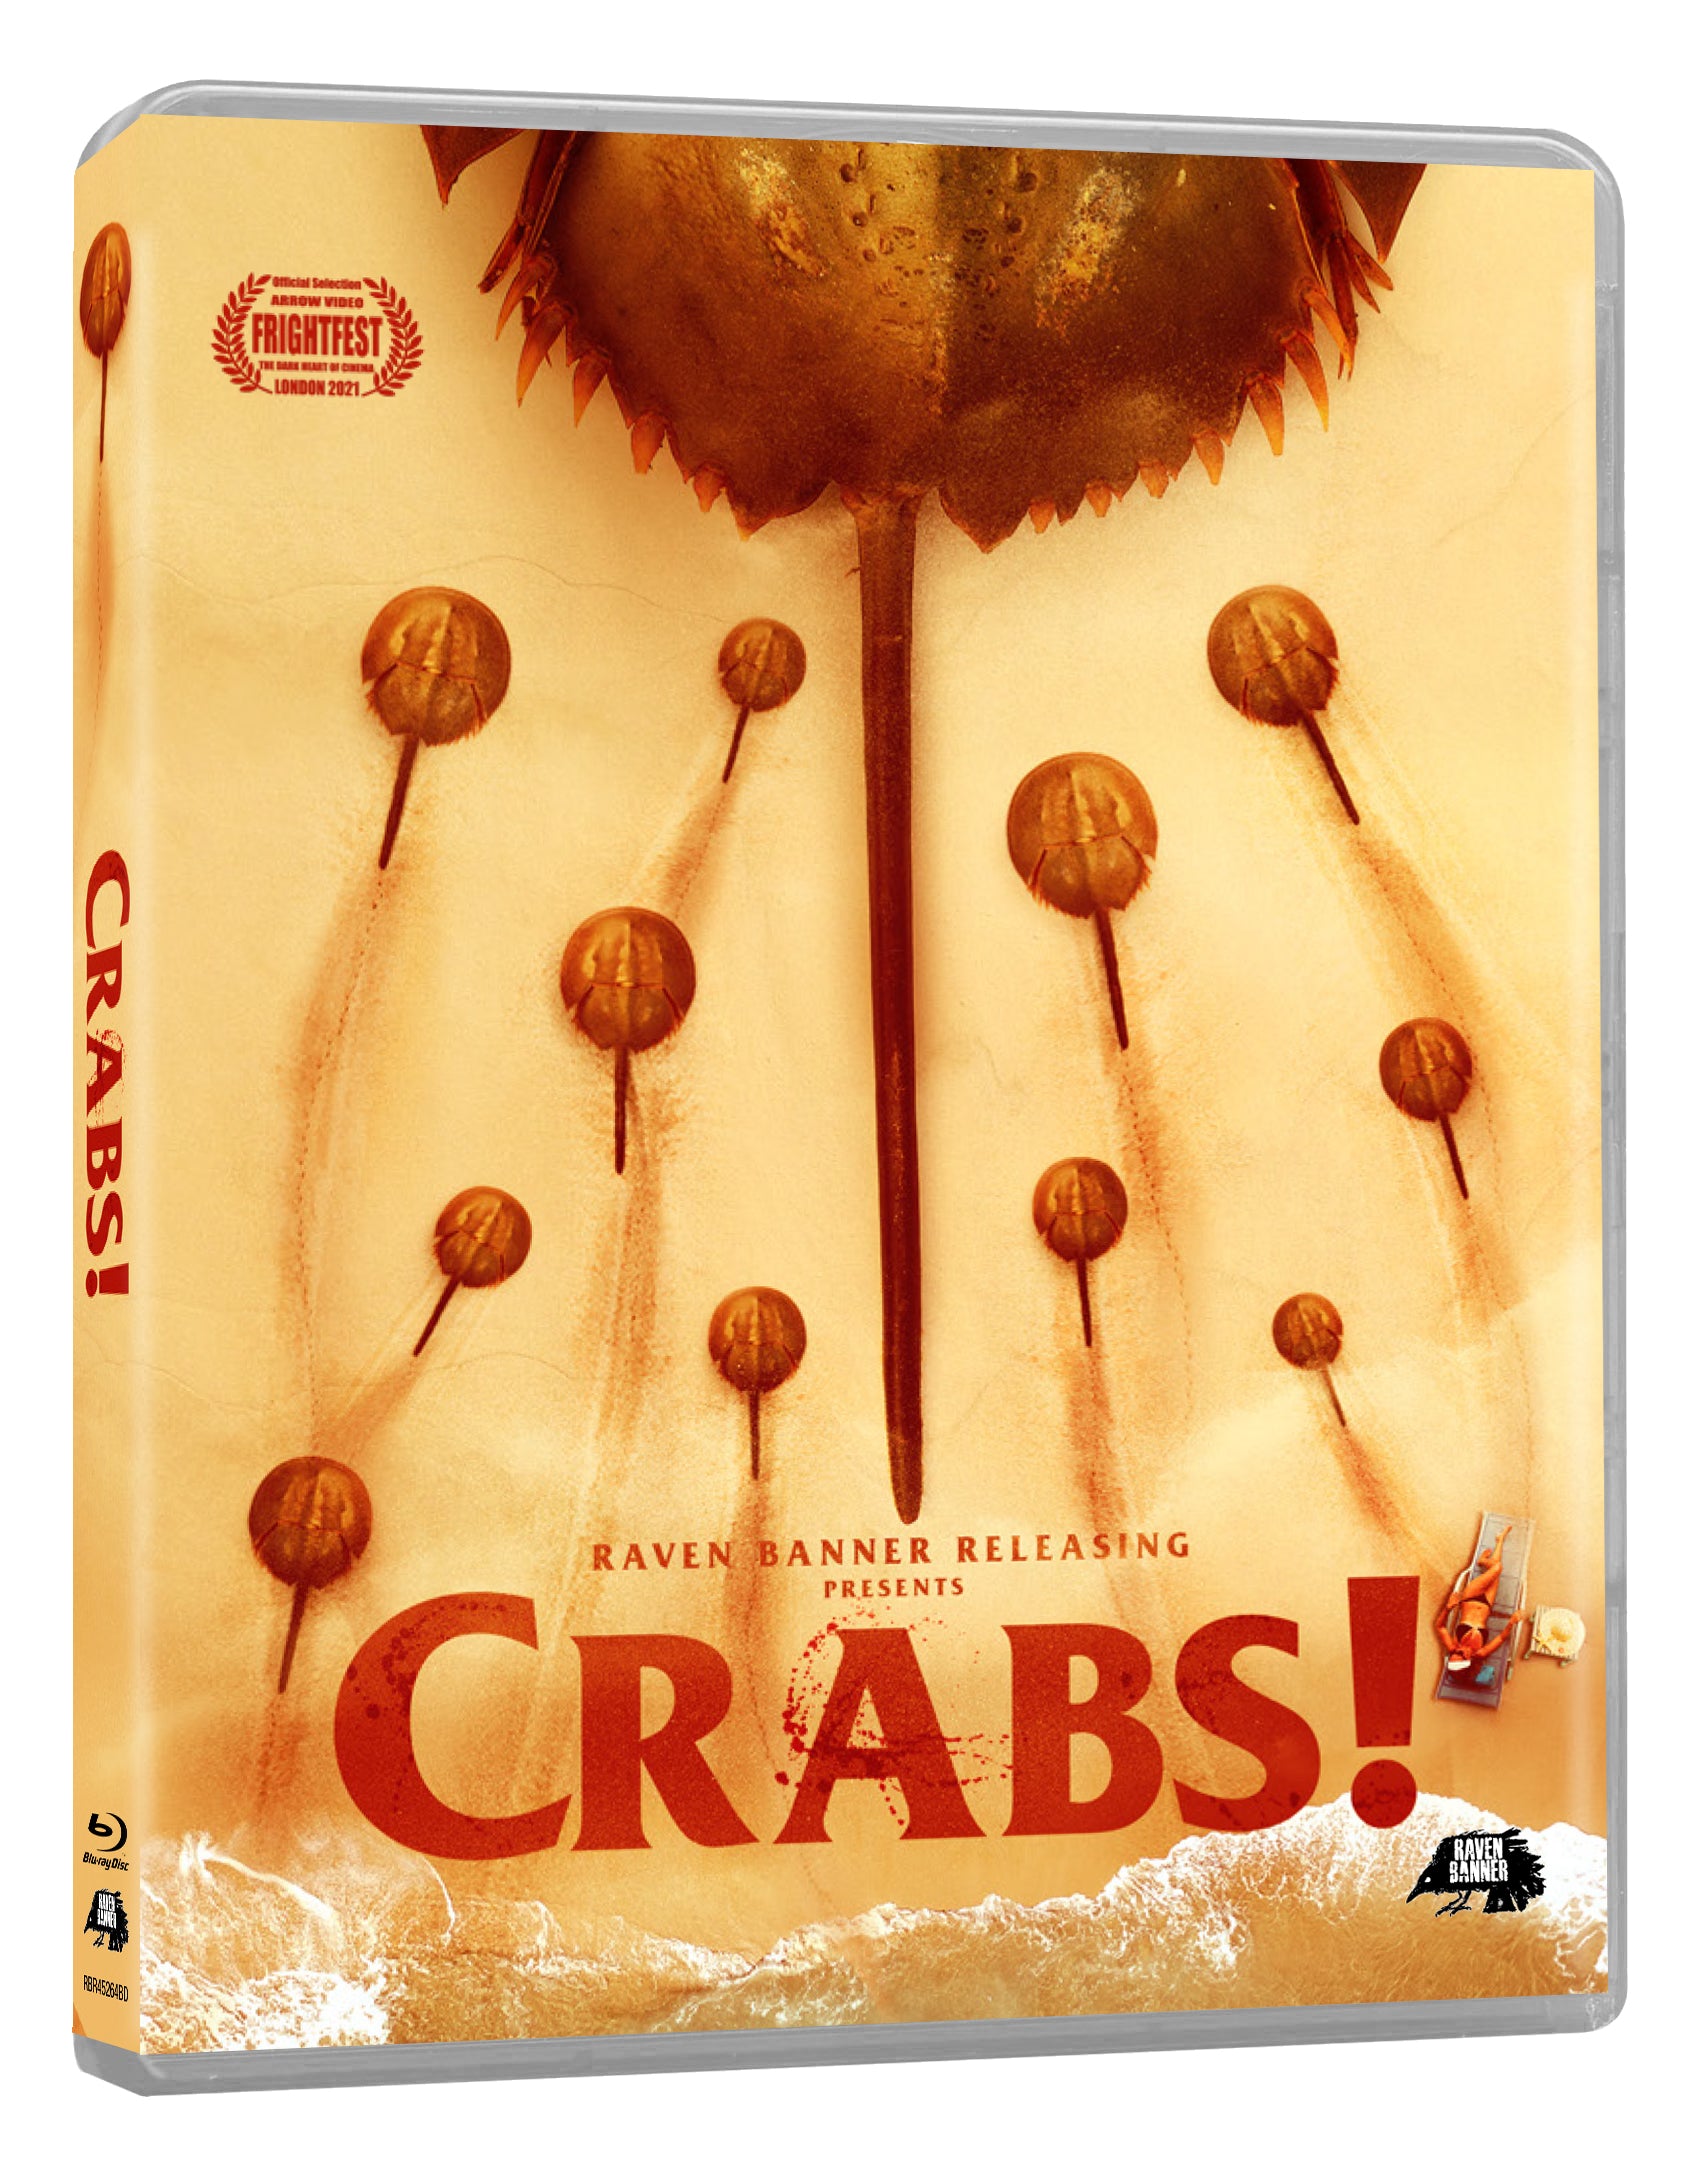 CRABS! BLU-RAY & CD COMBO w/ LIMITED EDITION O-CARD